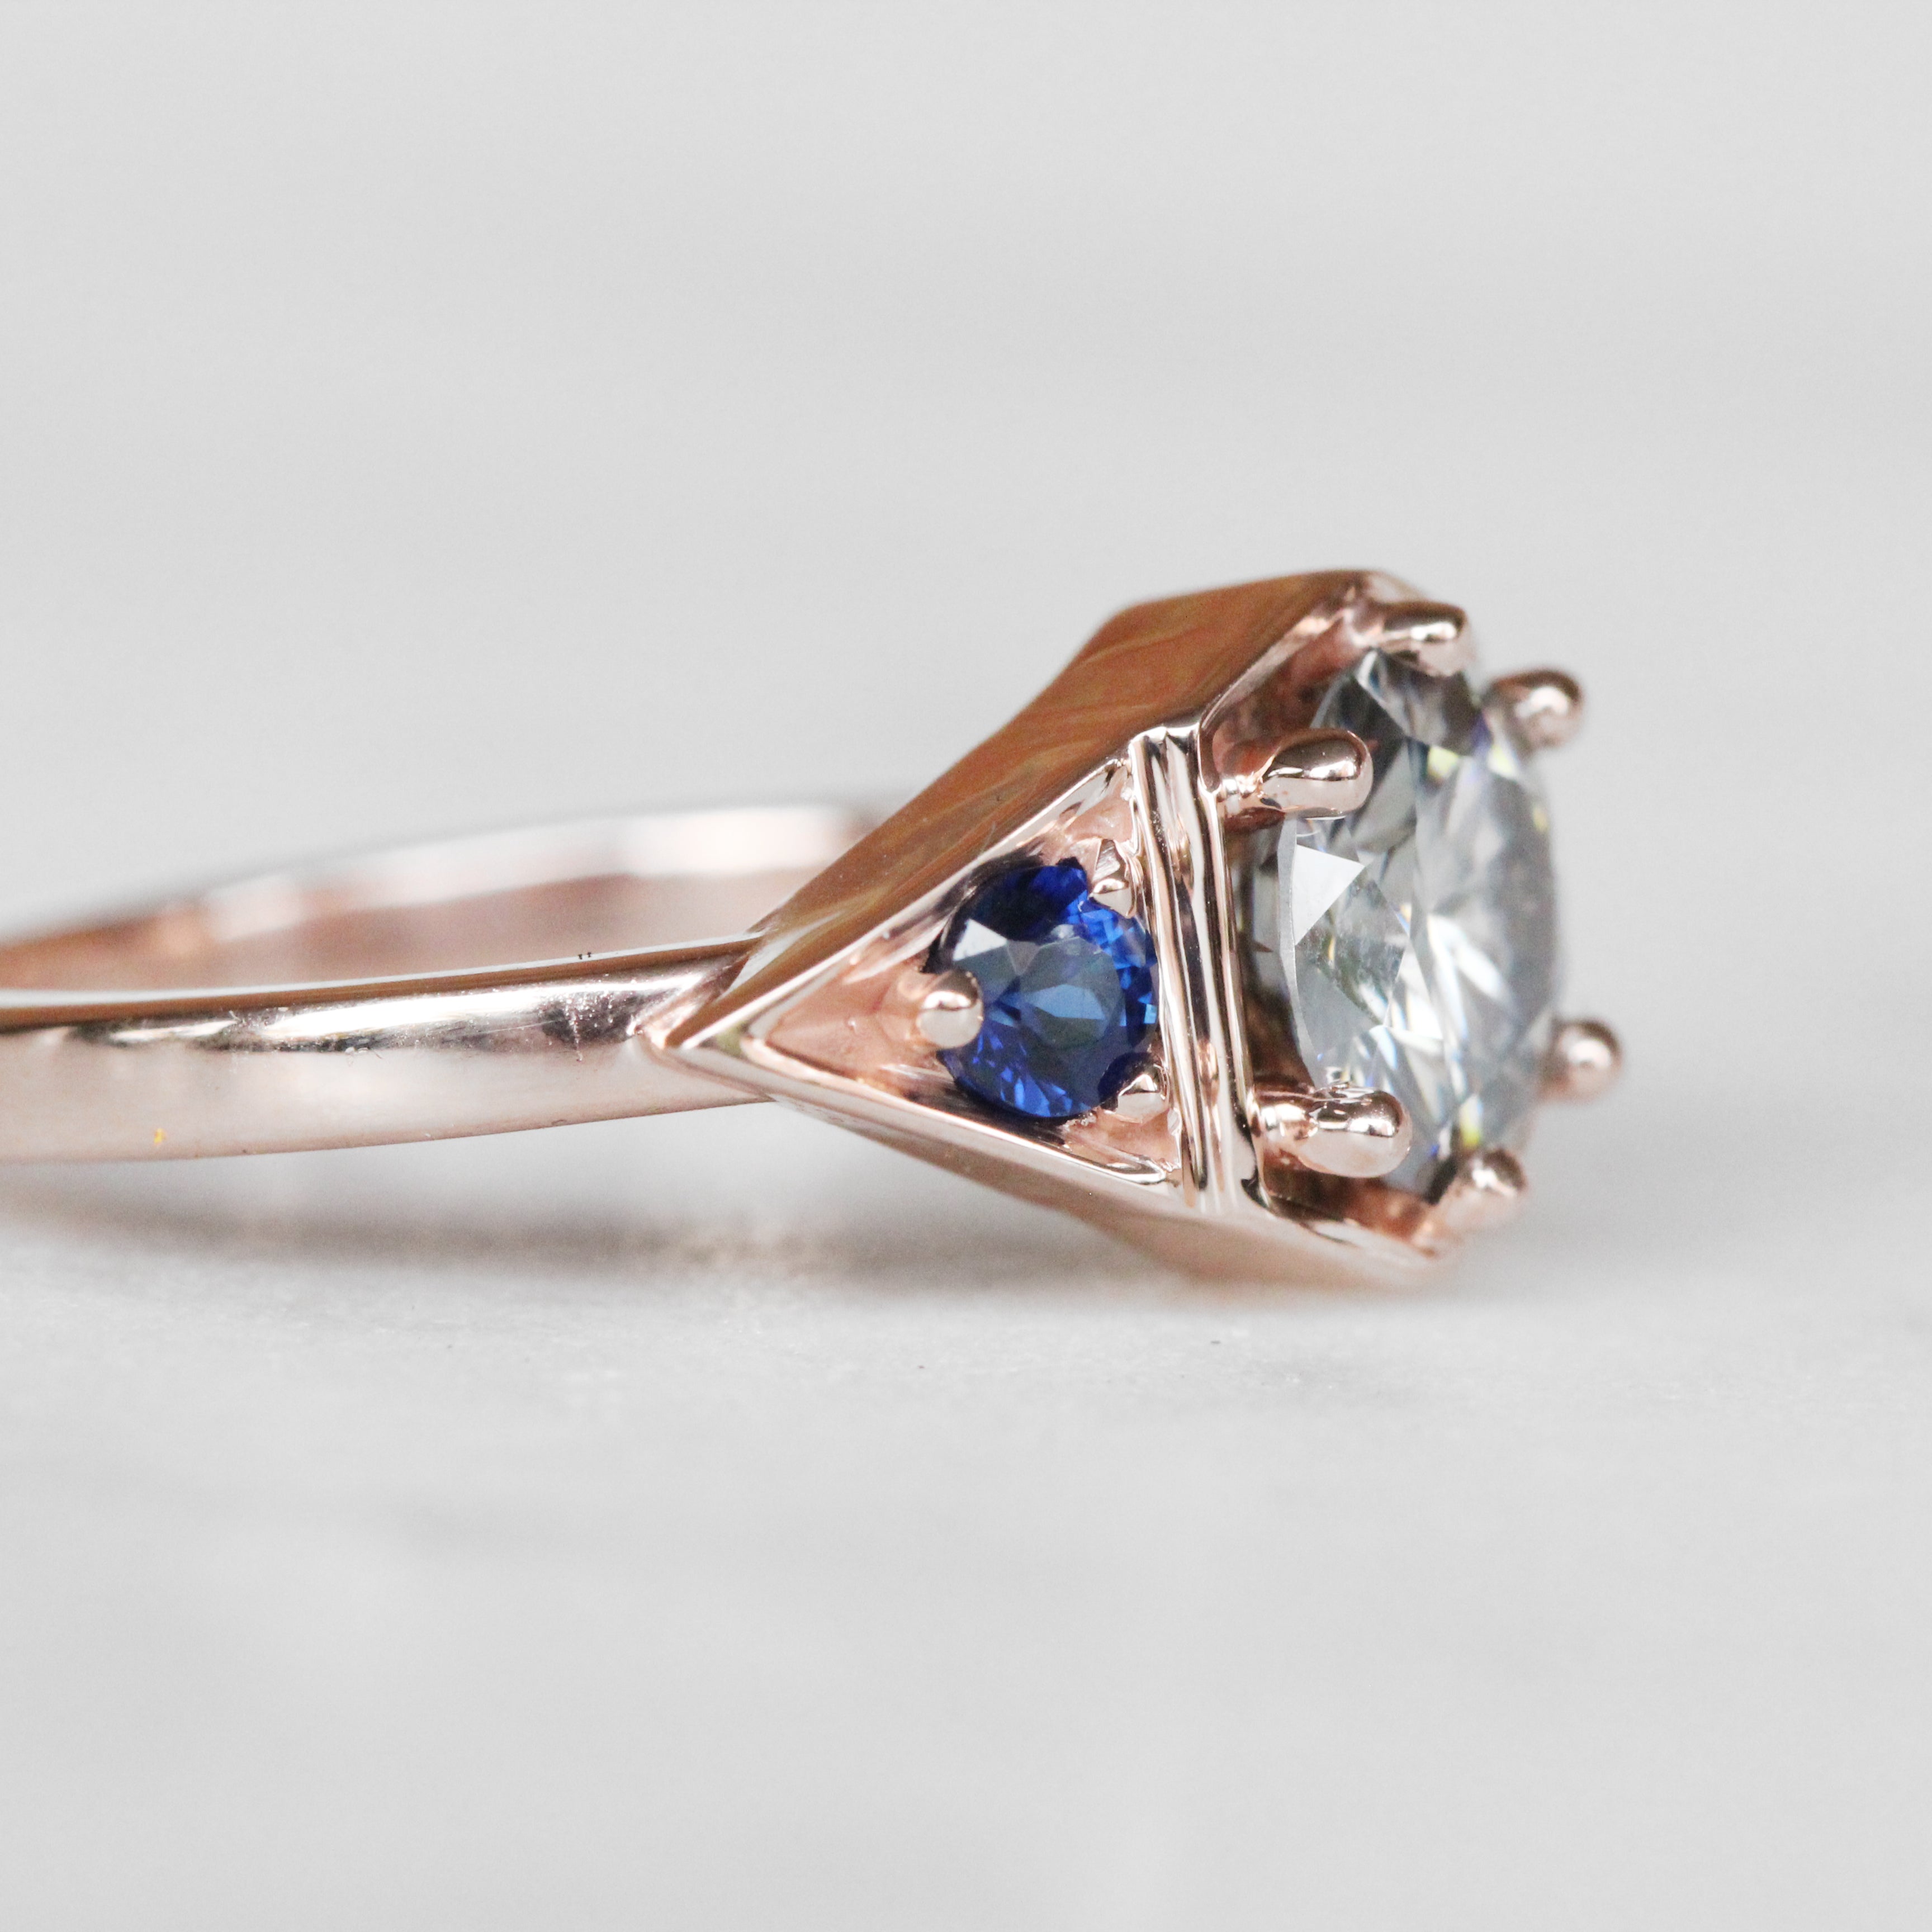 Cassia Ring with Gray Moissanite and Blue Sapphire Accents in 10k Rose Gold - Ready to Size and Ship - Midwinter Co. Alternative Bridal Rings and Modern Fine Jewelry